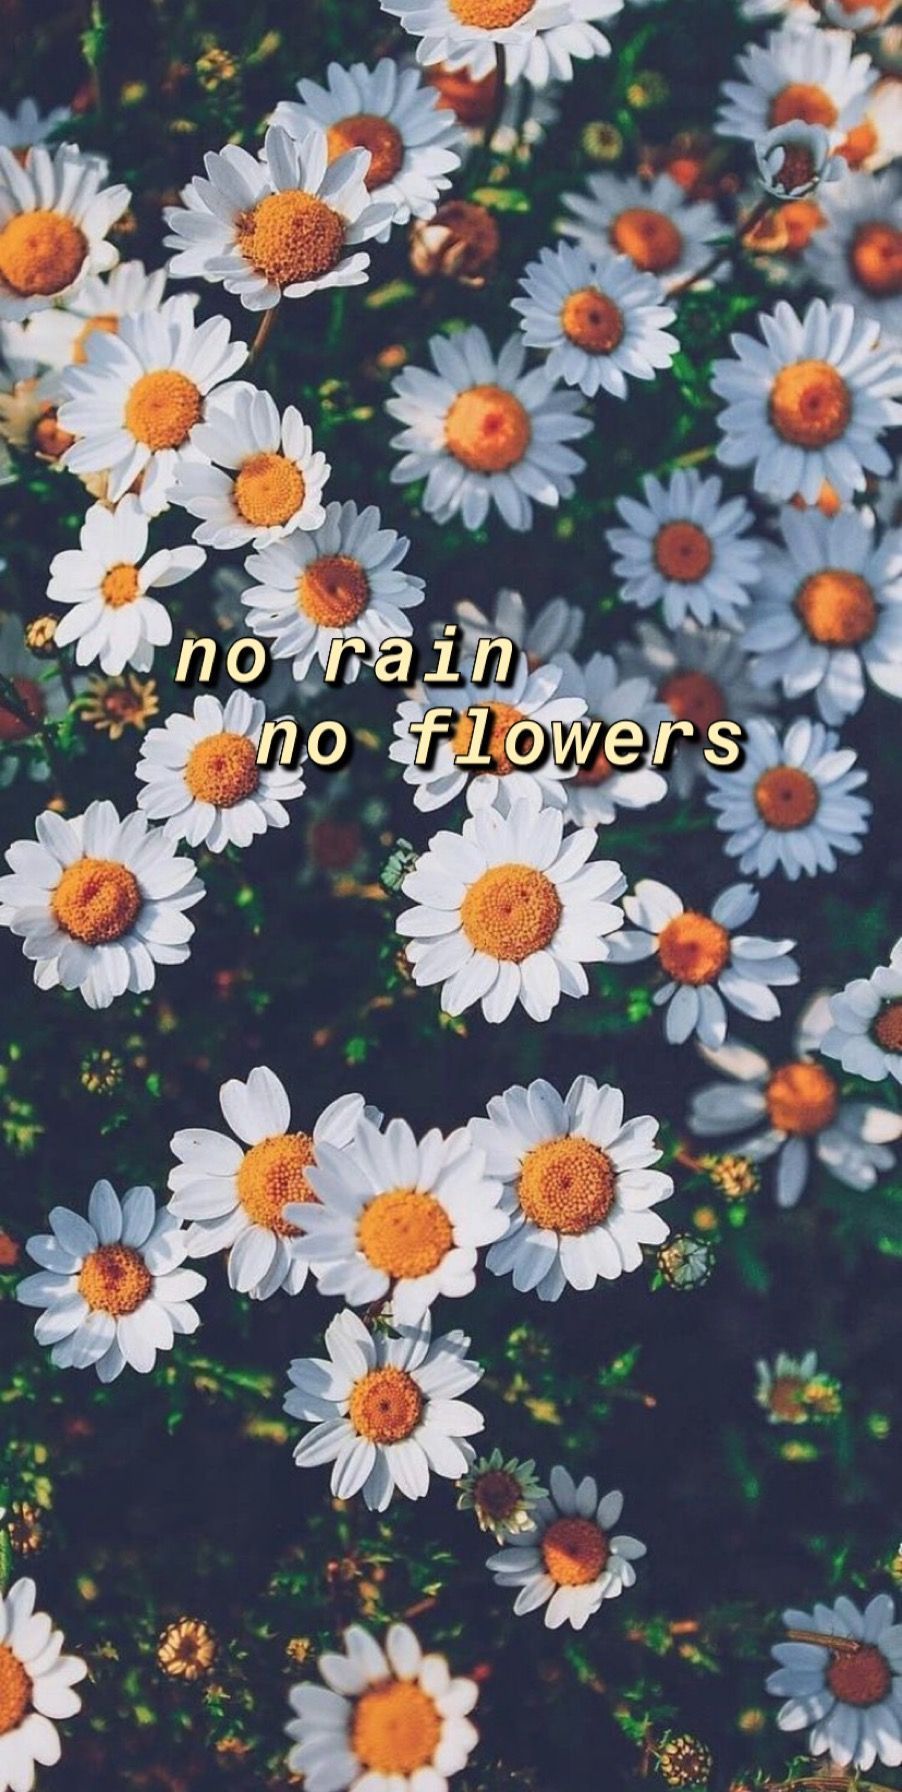 A phone wallpaper of white flowers with the text 